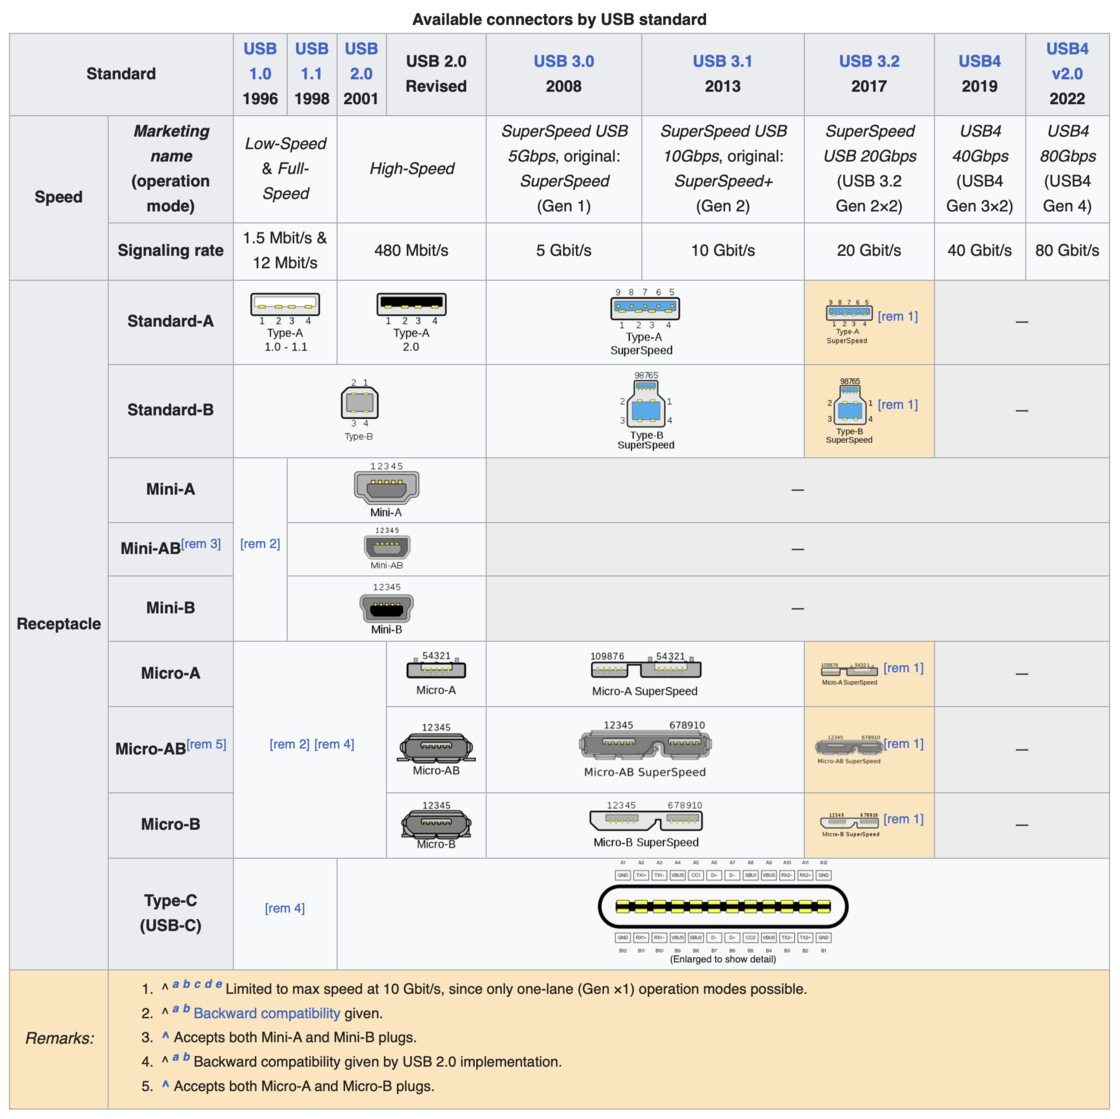 Available Connectors by USB Standard